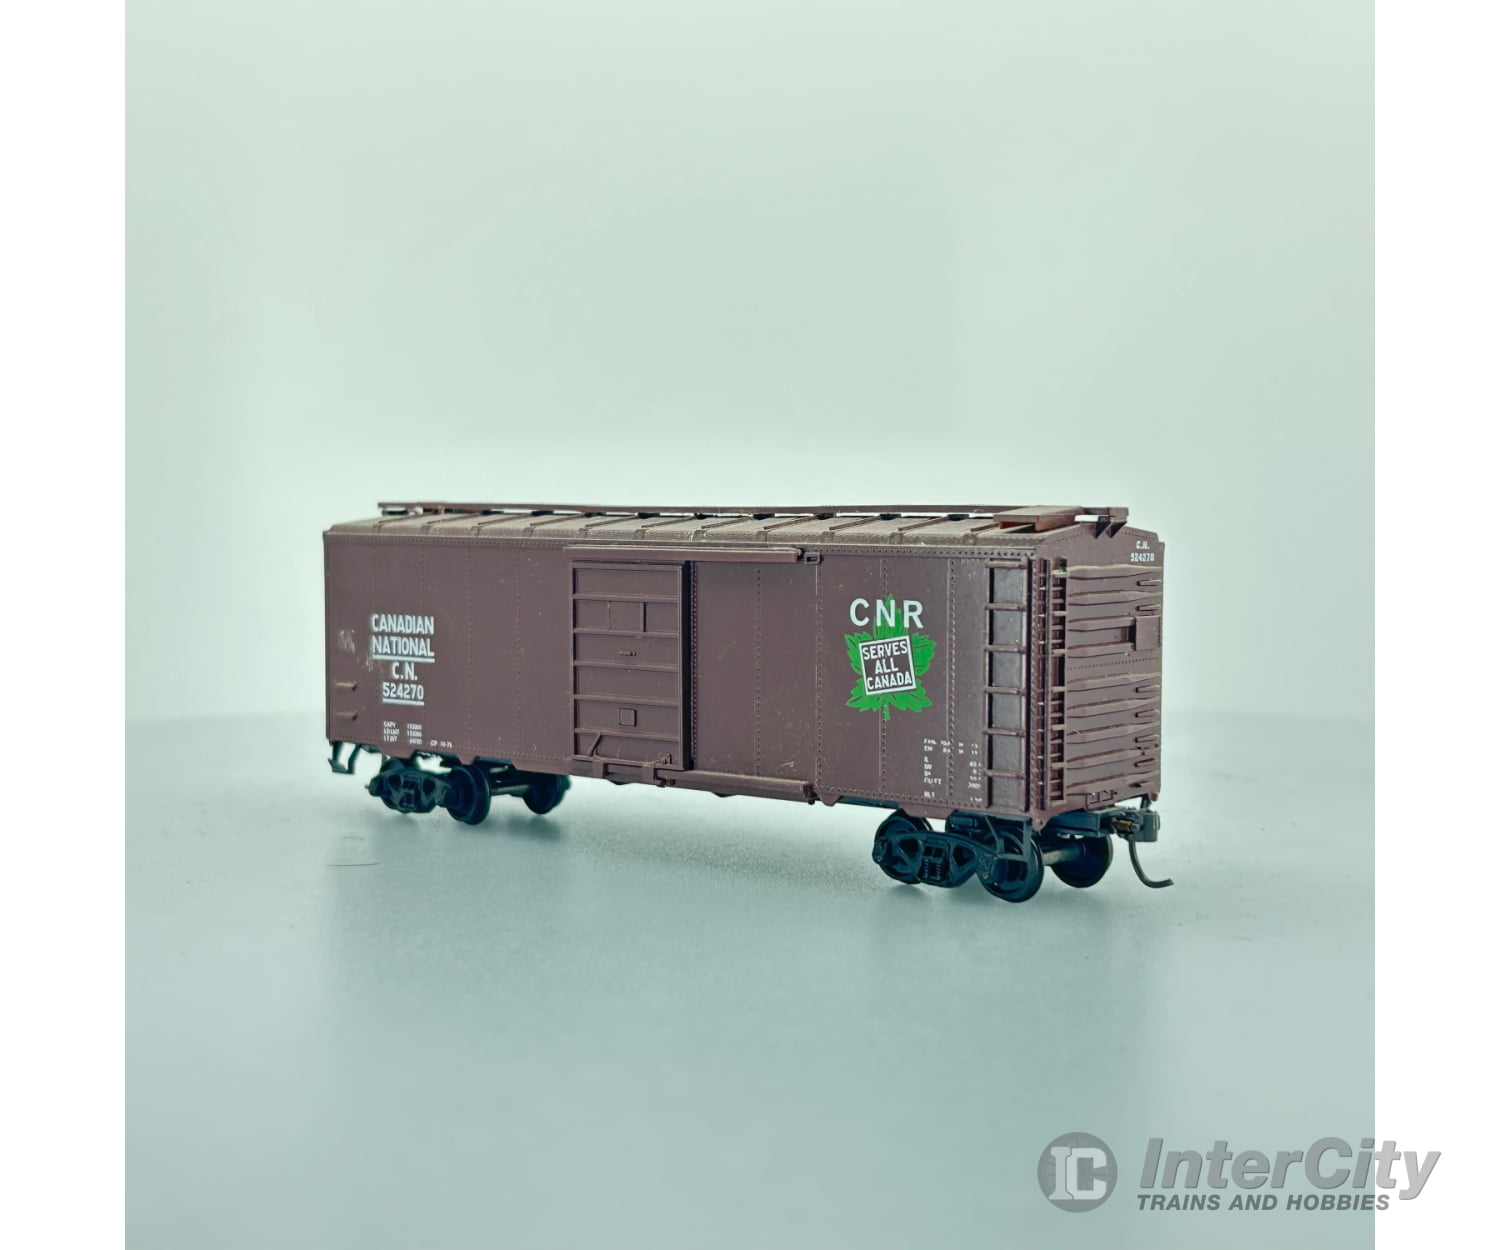 Roundhouse 40 Single Door Boxcar Canadian National Cn 524270 Freight Cars